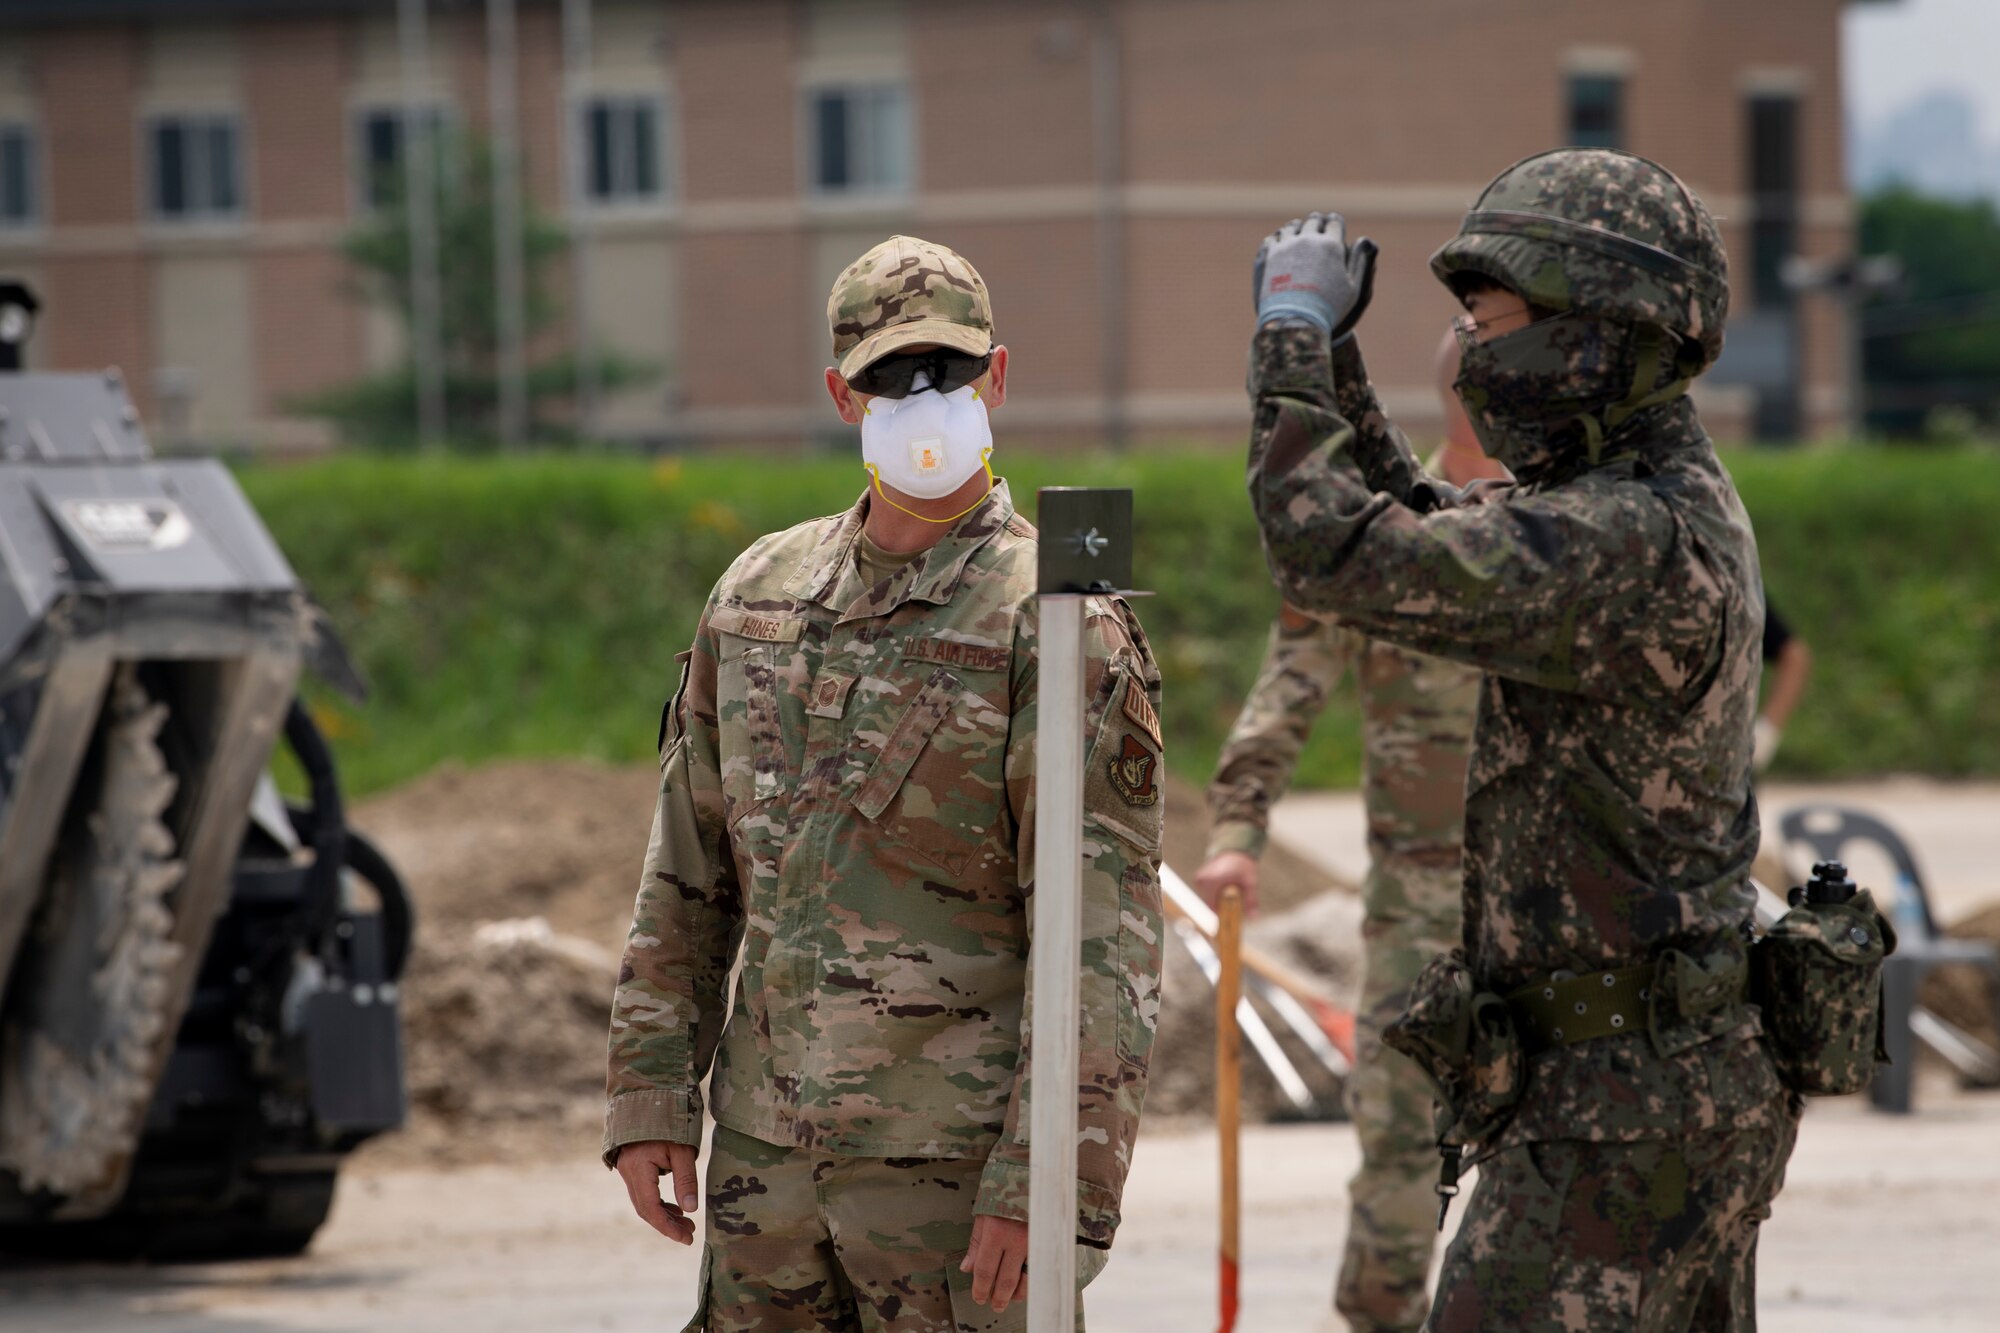 Master Sgt. Marcus Hines, 35th Civil Engineer Squadron, horizontal repair shop superintendent from Misawa Air Base, Japan, observes a member of the Republic of Korea Air Force giving hand signals during a runway repair training event as part of a bilateral training scenario at Suwon Air Base, Republic of Korea, July 6, 2022.